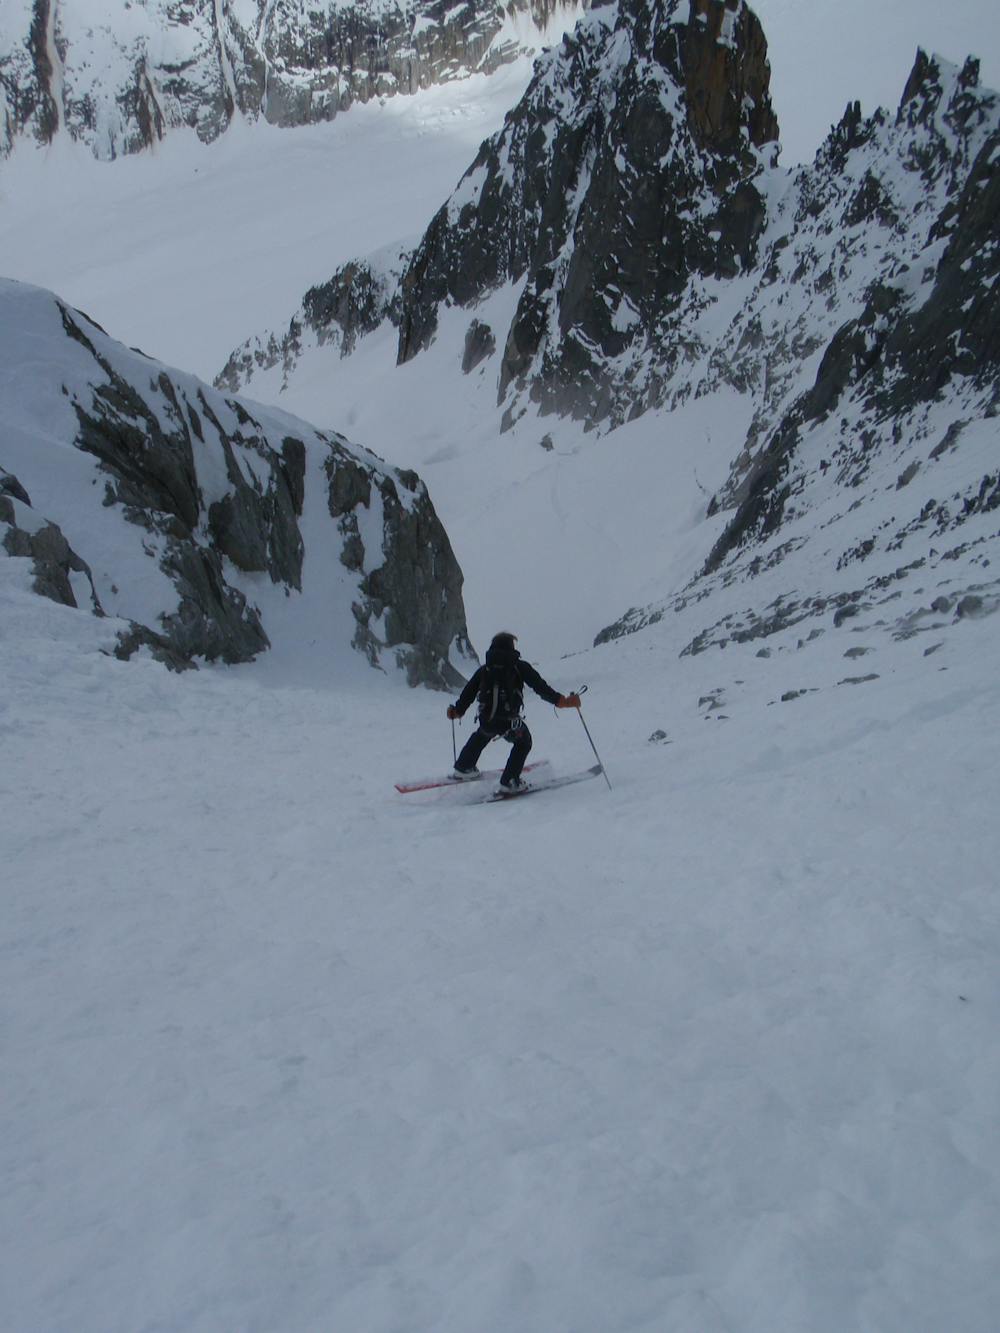 Initial turns in the couloir.